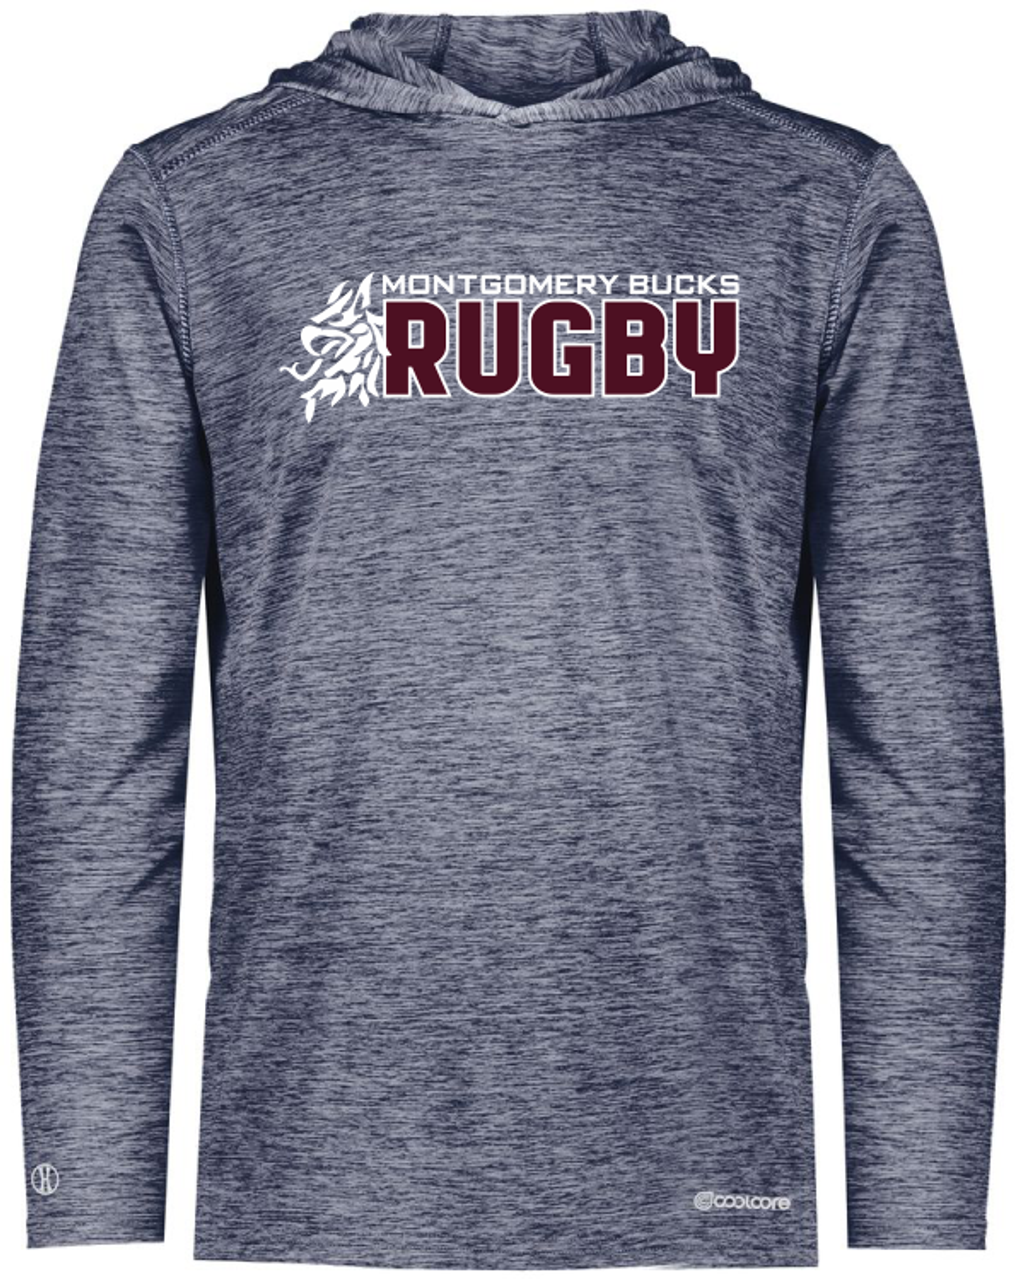 MB Rugby Hooded LS Performance Tee, Navy